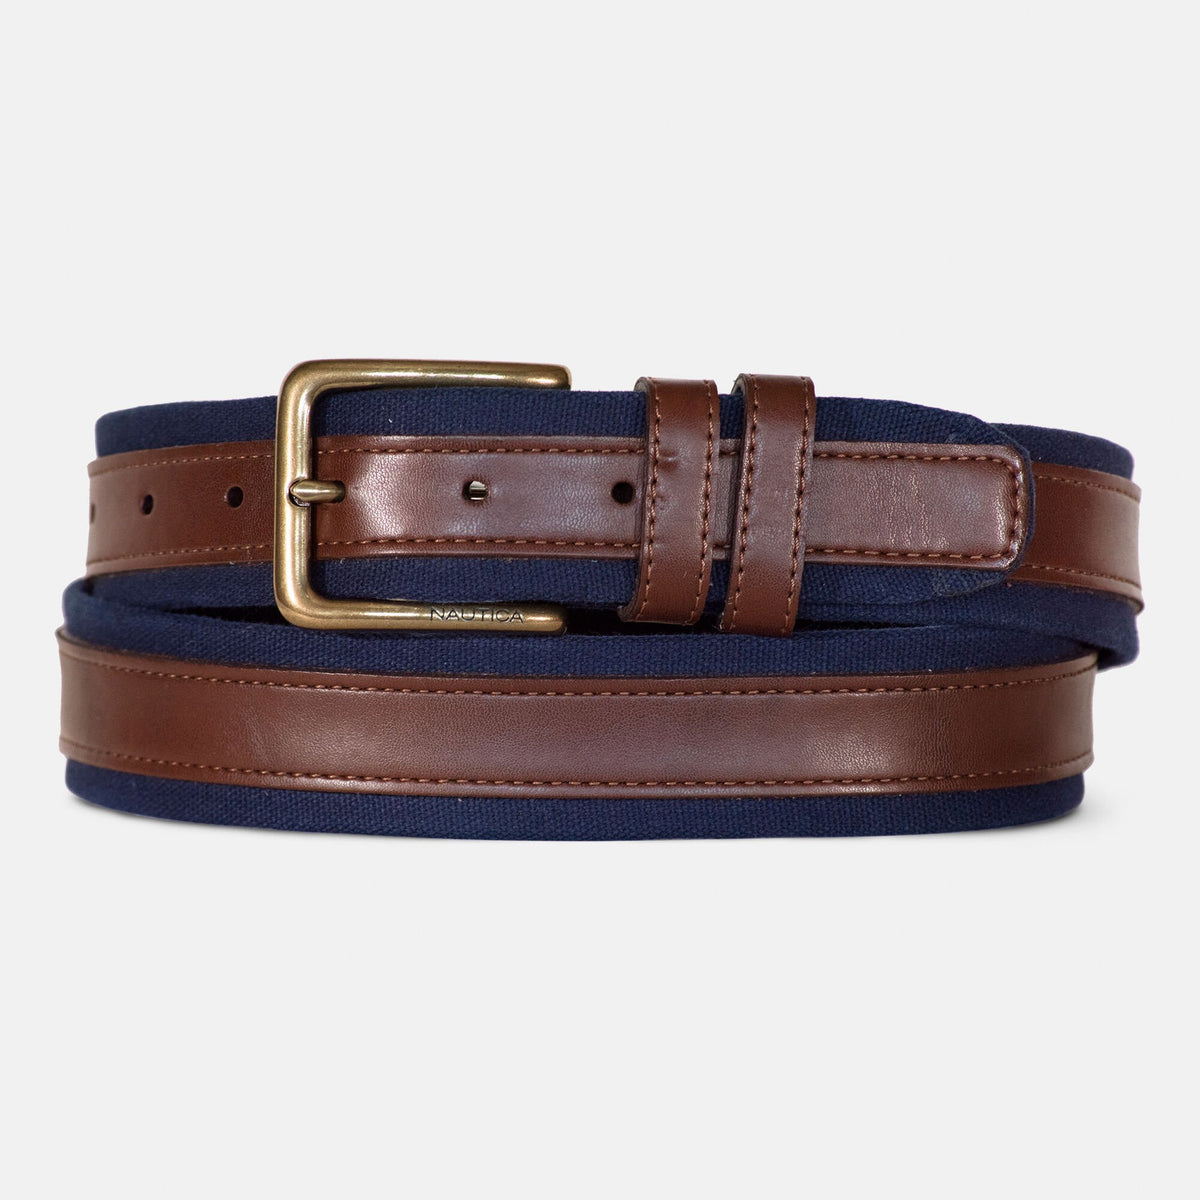 Nautica Men's Faux-Leather-Trimmed Belt Brown Stone